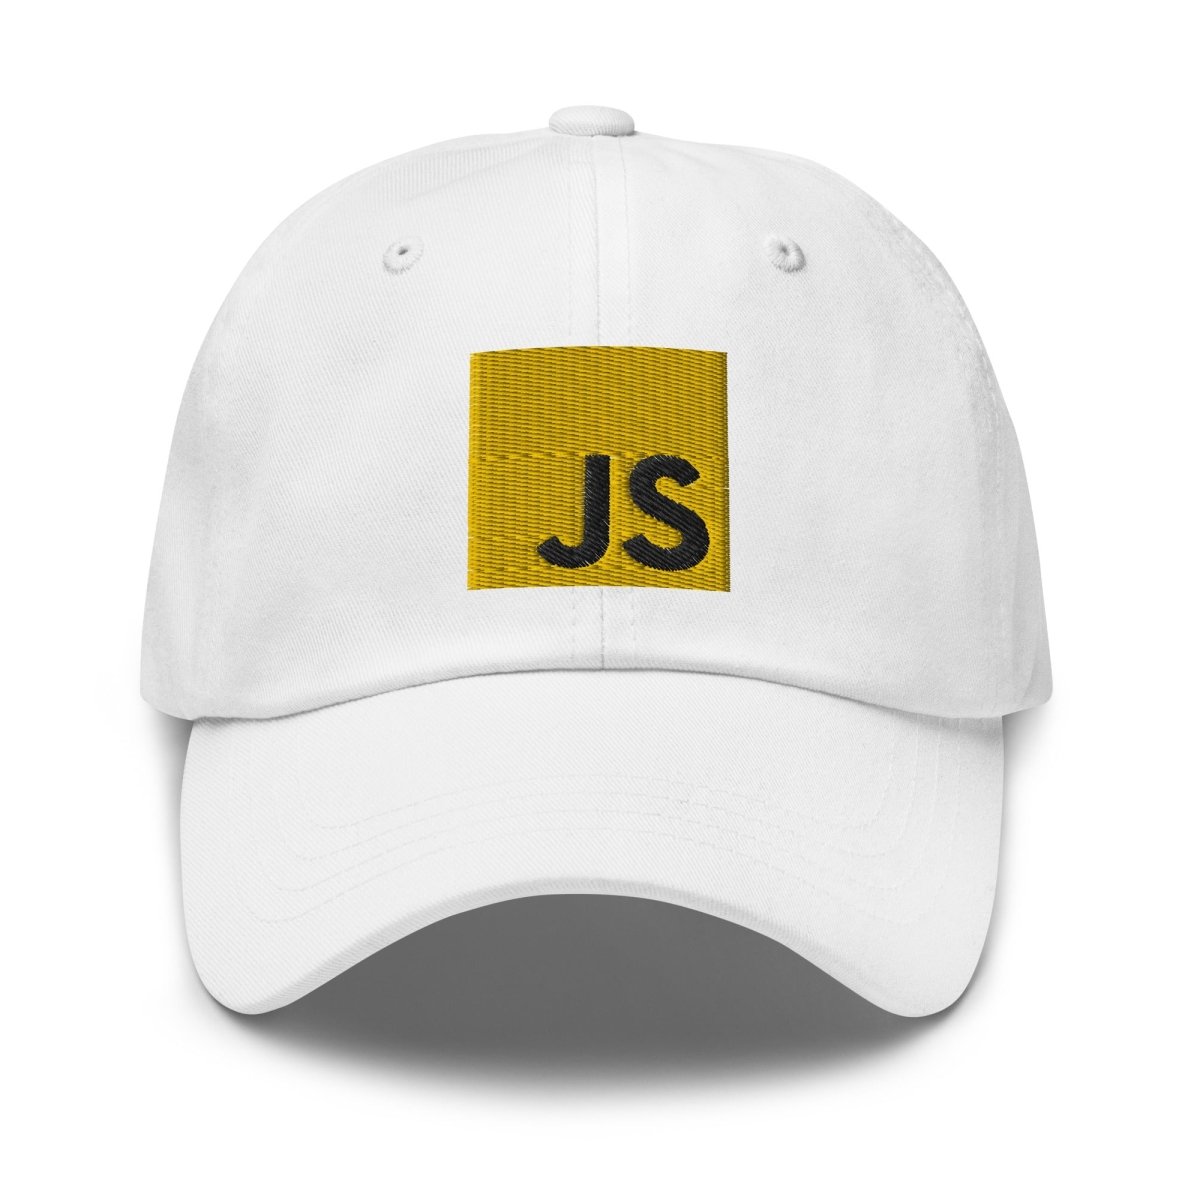 JavaScript Embroidered Cap - AI Store